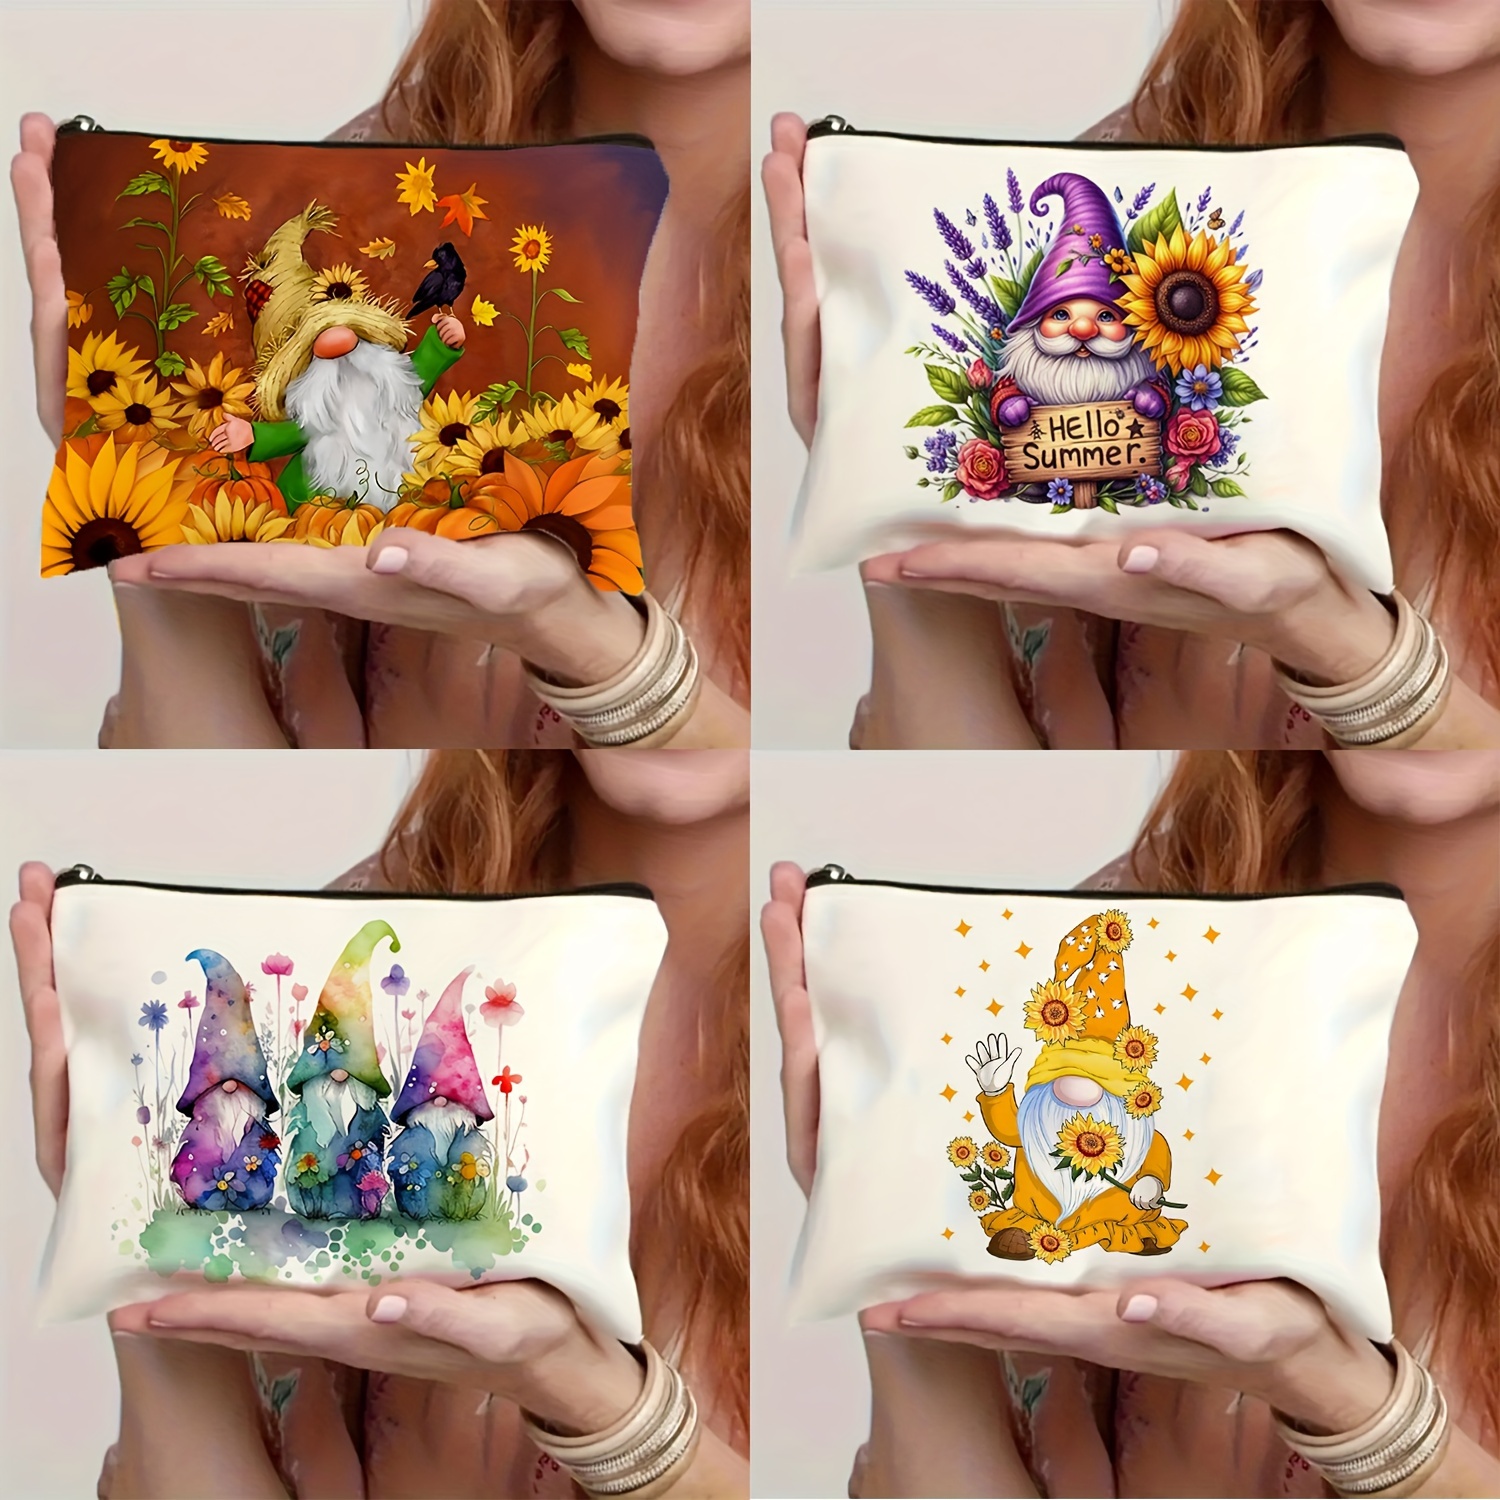 

1pc Seasonal Gnome Cosmetic Pouch, Large Capacity Waterproof Makeup Bag With Zipper, Vibrant Sunflower Design, Ideal For Travel & Gifts, Summer & Autumn Festive Organizer Cases